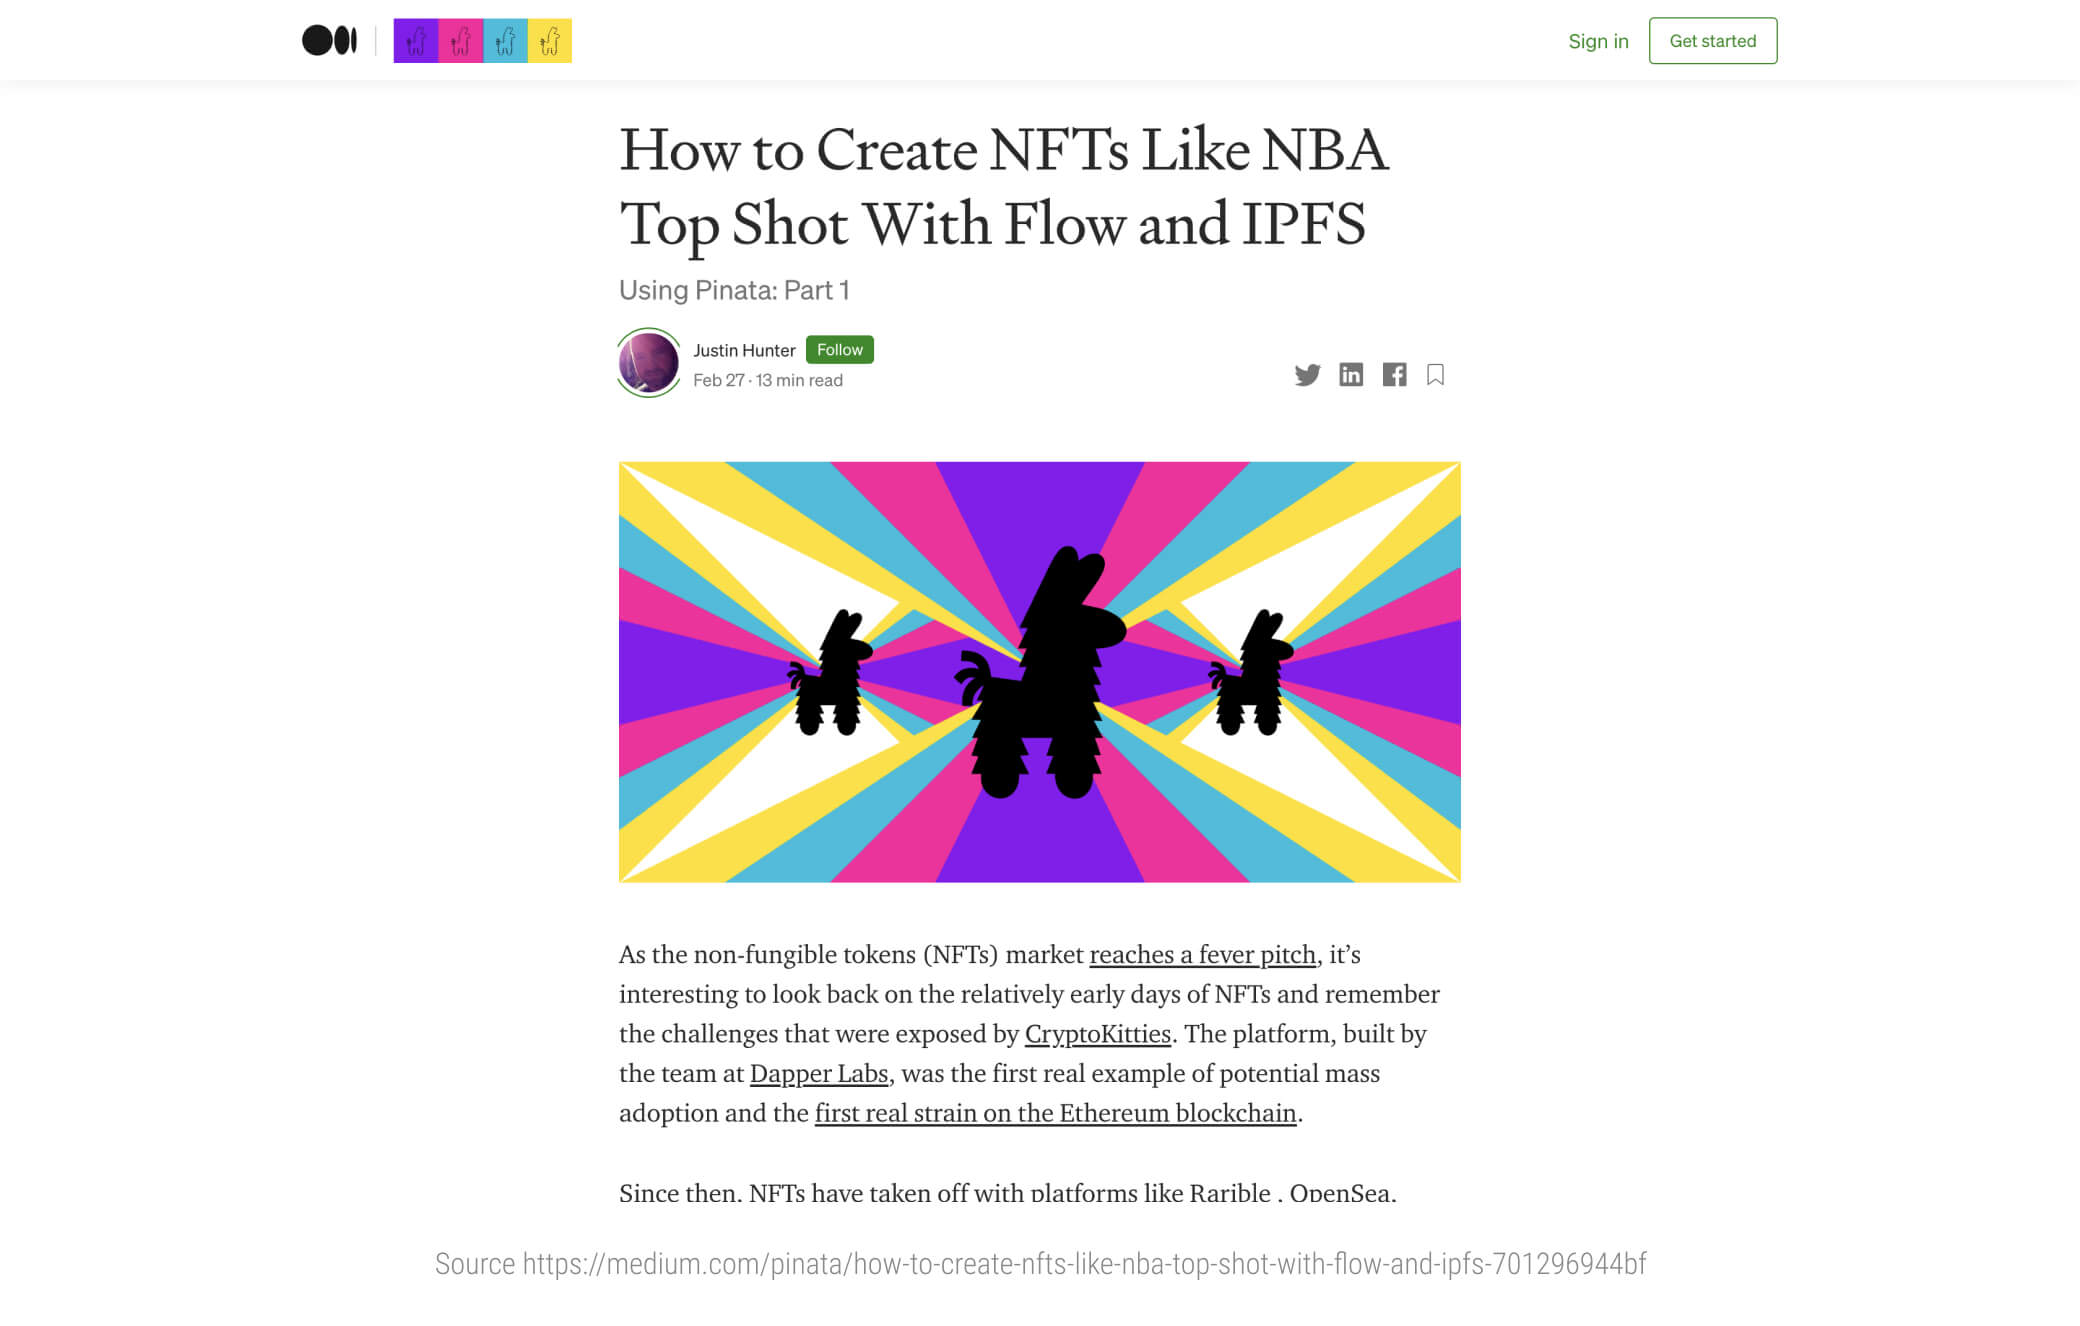 How-to-Create-NFTs-Like-NBA-Top-Shot-With-Flow-and-IPFS